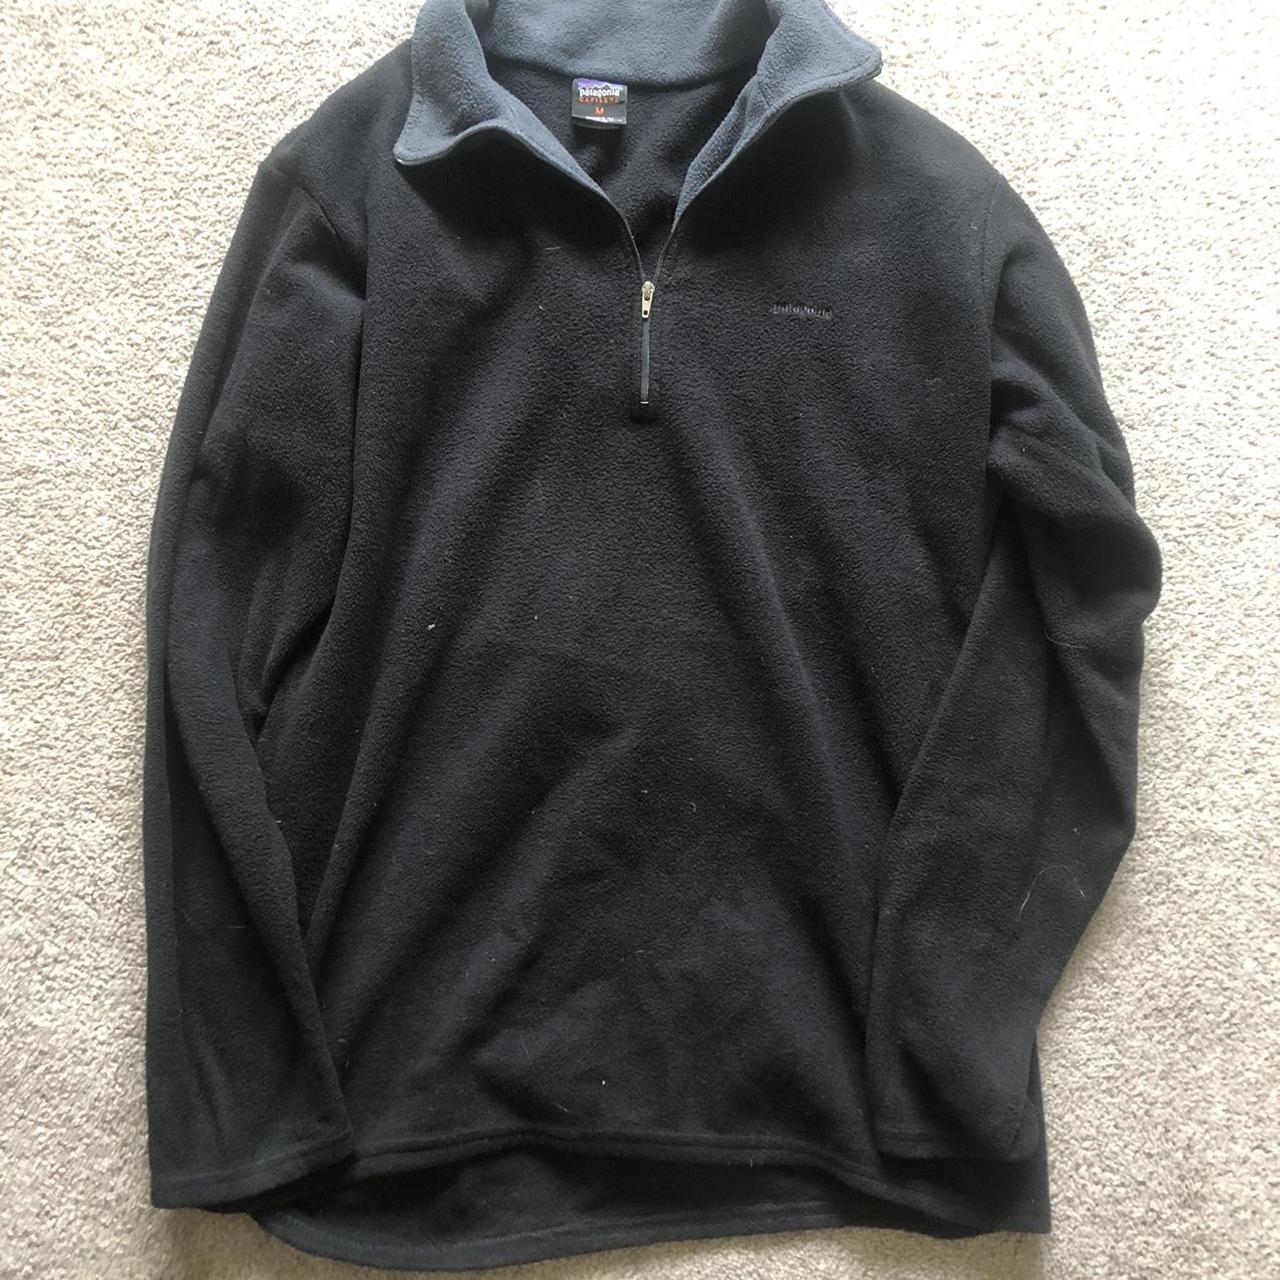 Patagonia fleece Synchilla style Pit to pit 19... - Depop